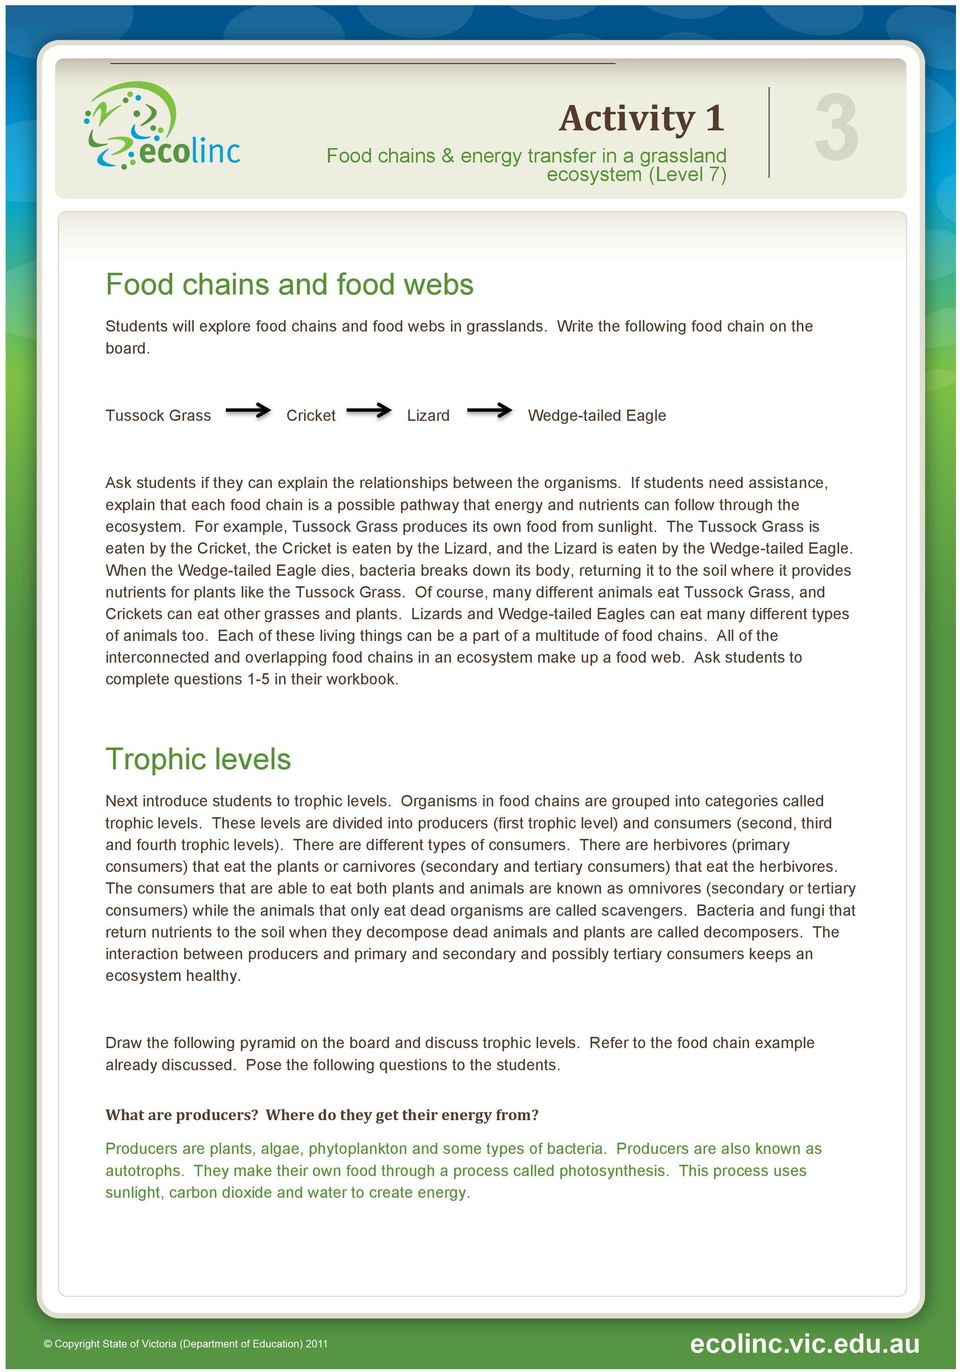 If students need assistance, explain that each food chain is a possible pathway that energy and nutrients can follow through the ecosystem.